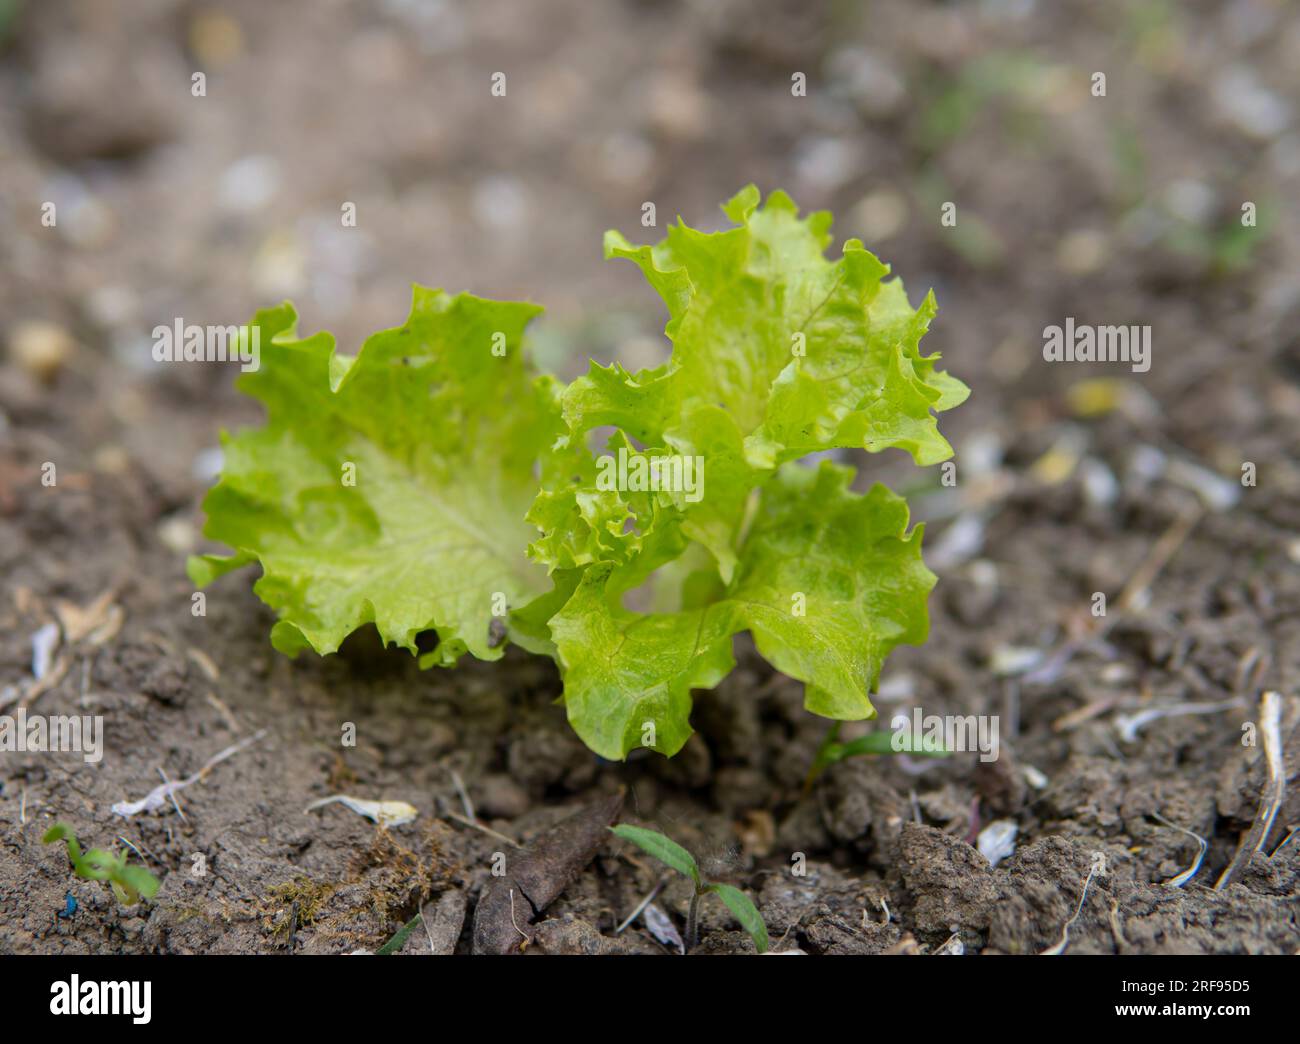 Detail of small green lettuce growing on the ground Stock Photo